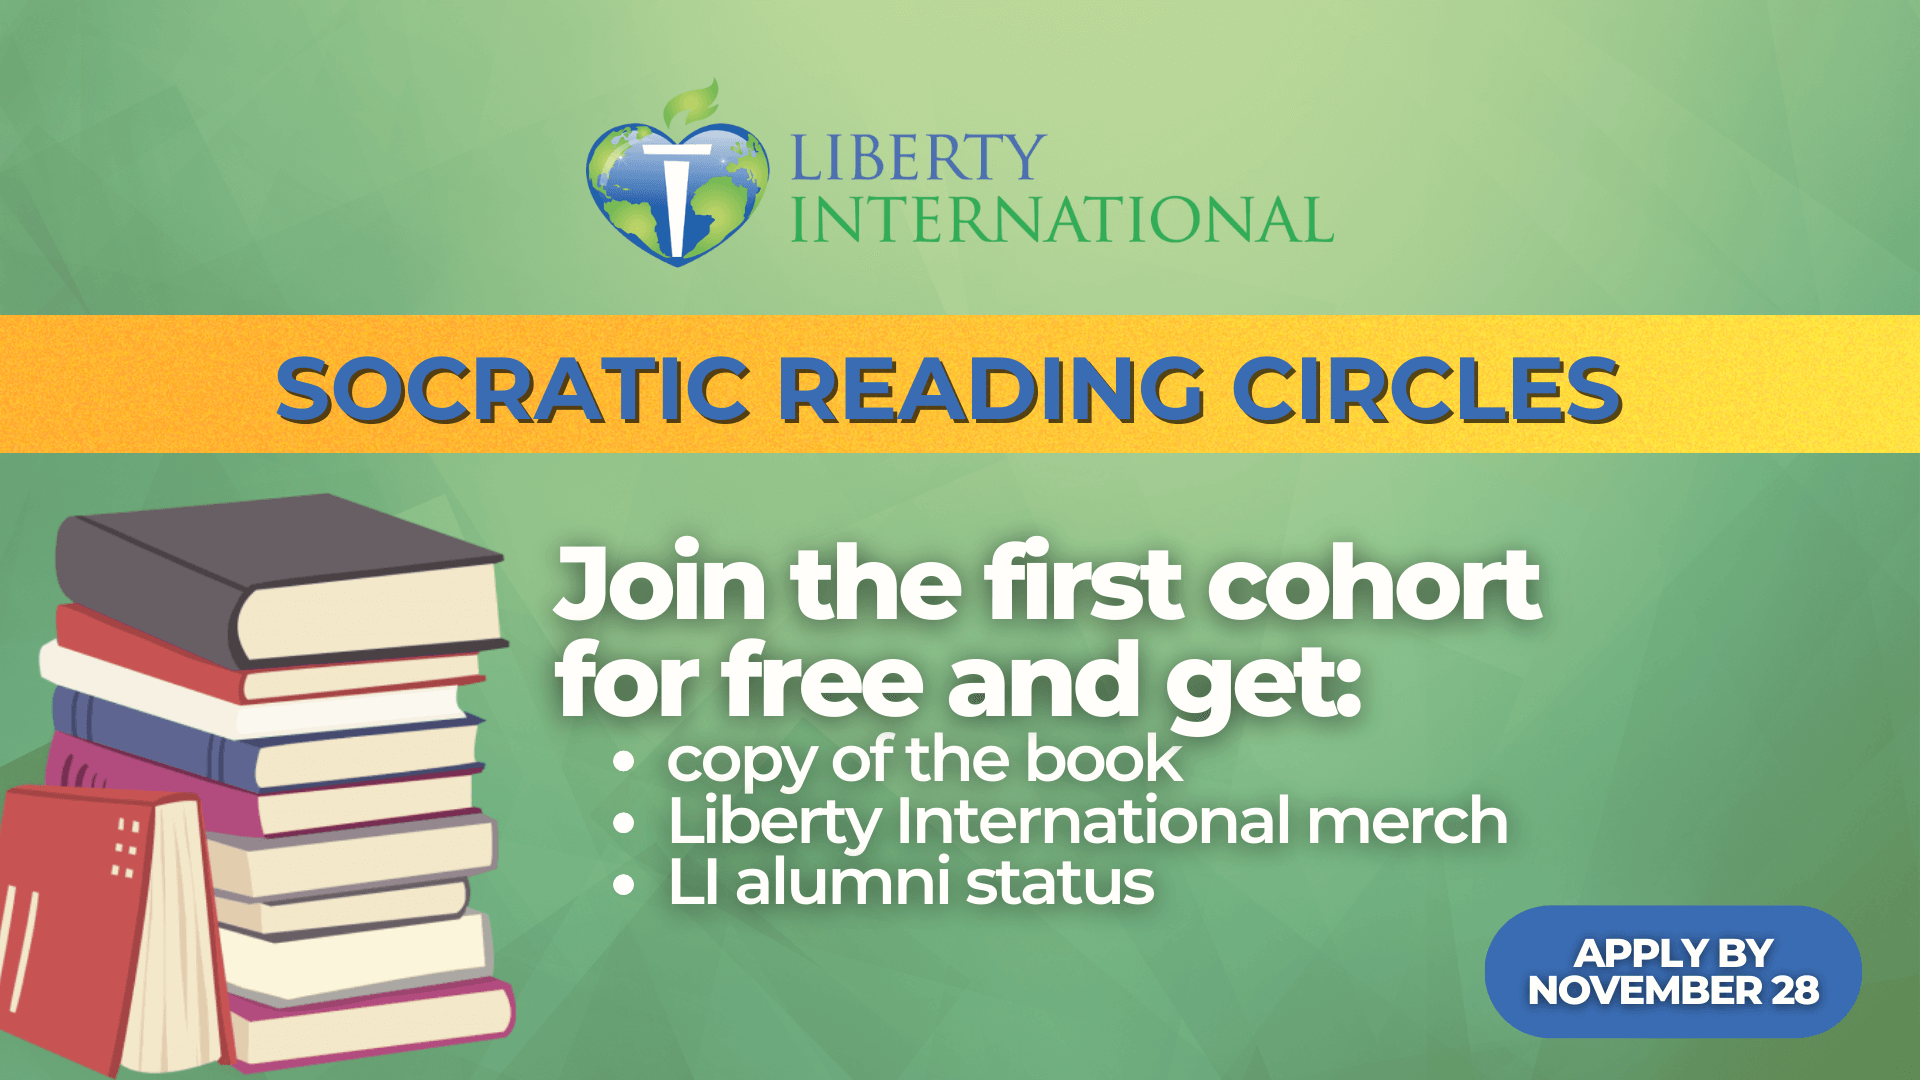 Join the first cohort of the Socratic Reading Circles for free!